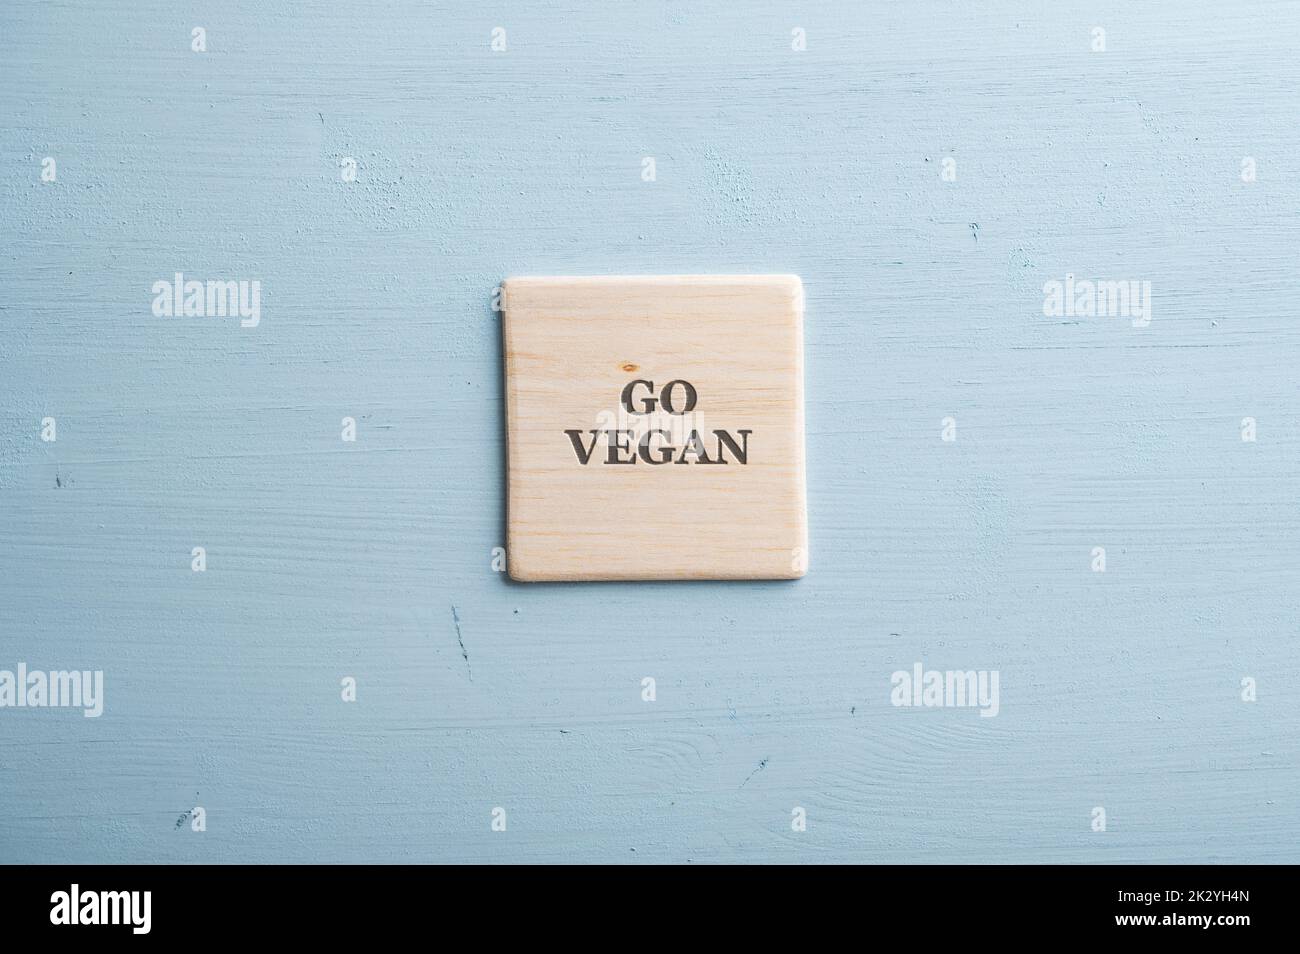 Go vegan sign spelled on wooden tile placed over pastel blue wooden background. Stock Photo